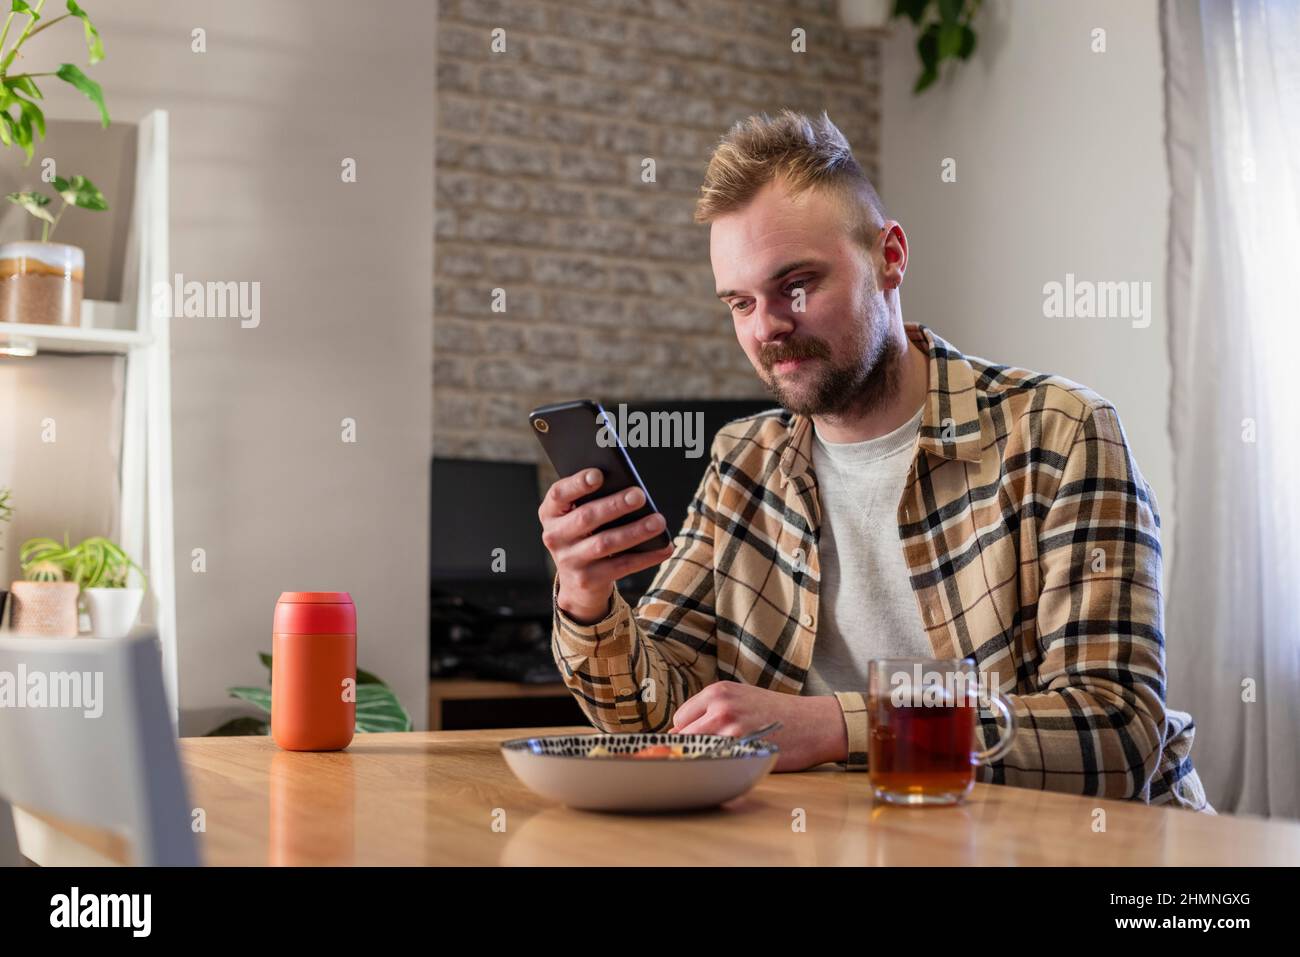 A side-view shot of a young man sitting at a table in his living room relaxing, he is using his smart phone and he has a plate of pasta near by. Stock Photo